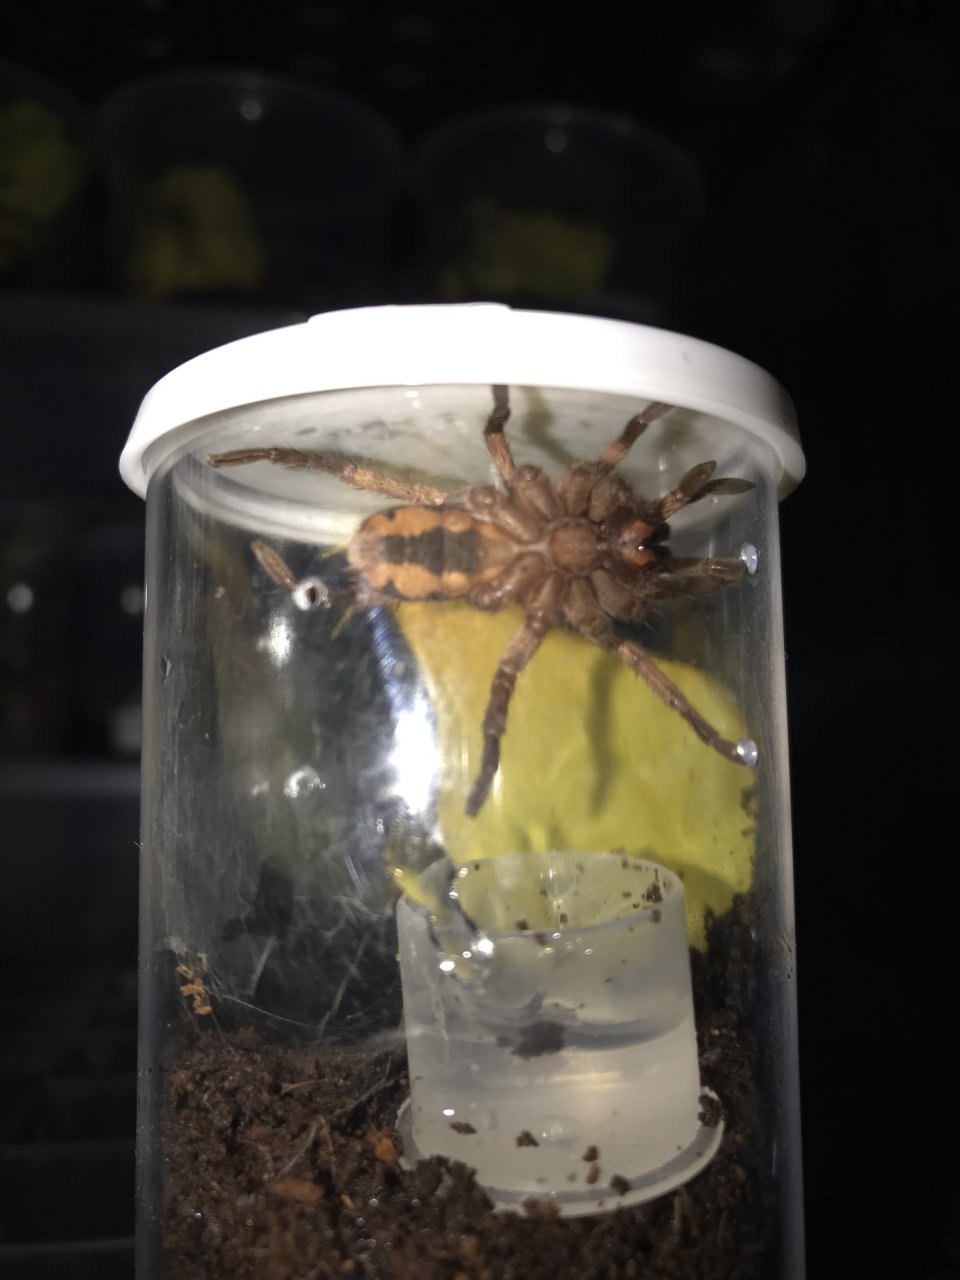 H. sp Colombia Large